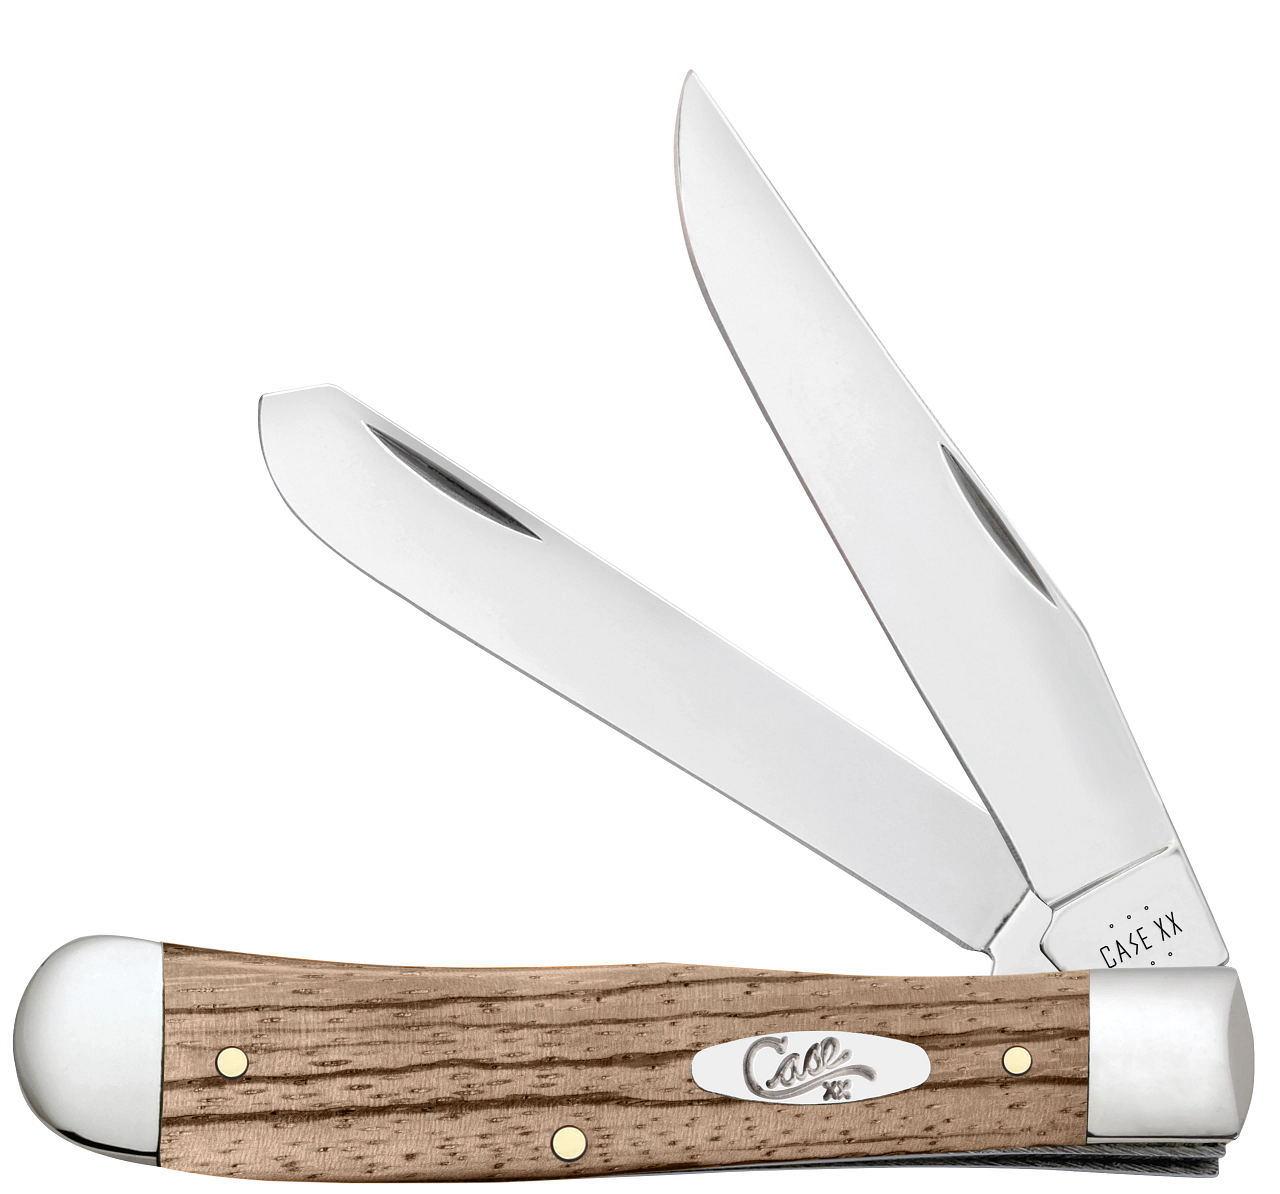 Case Trapper 25141 Smooth Natural Zebra Wood (7254 SS)